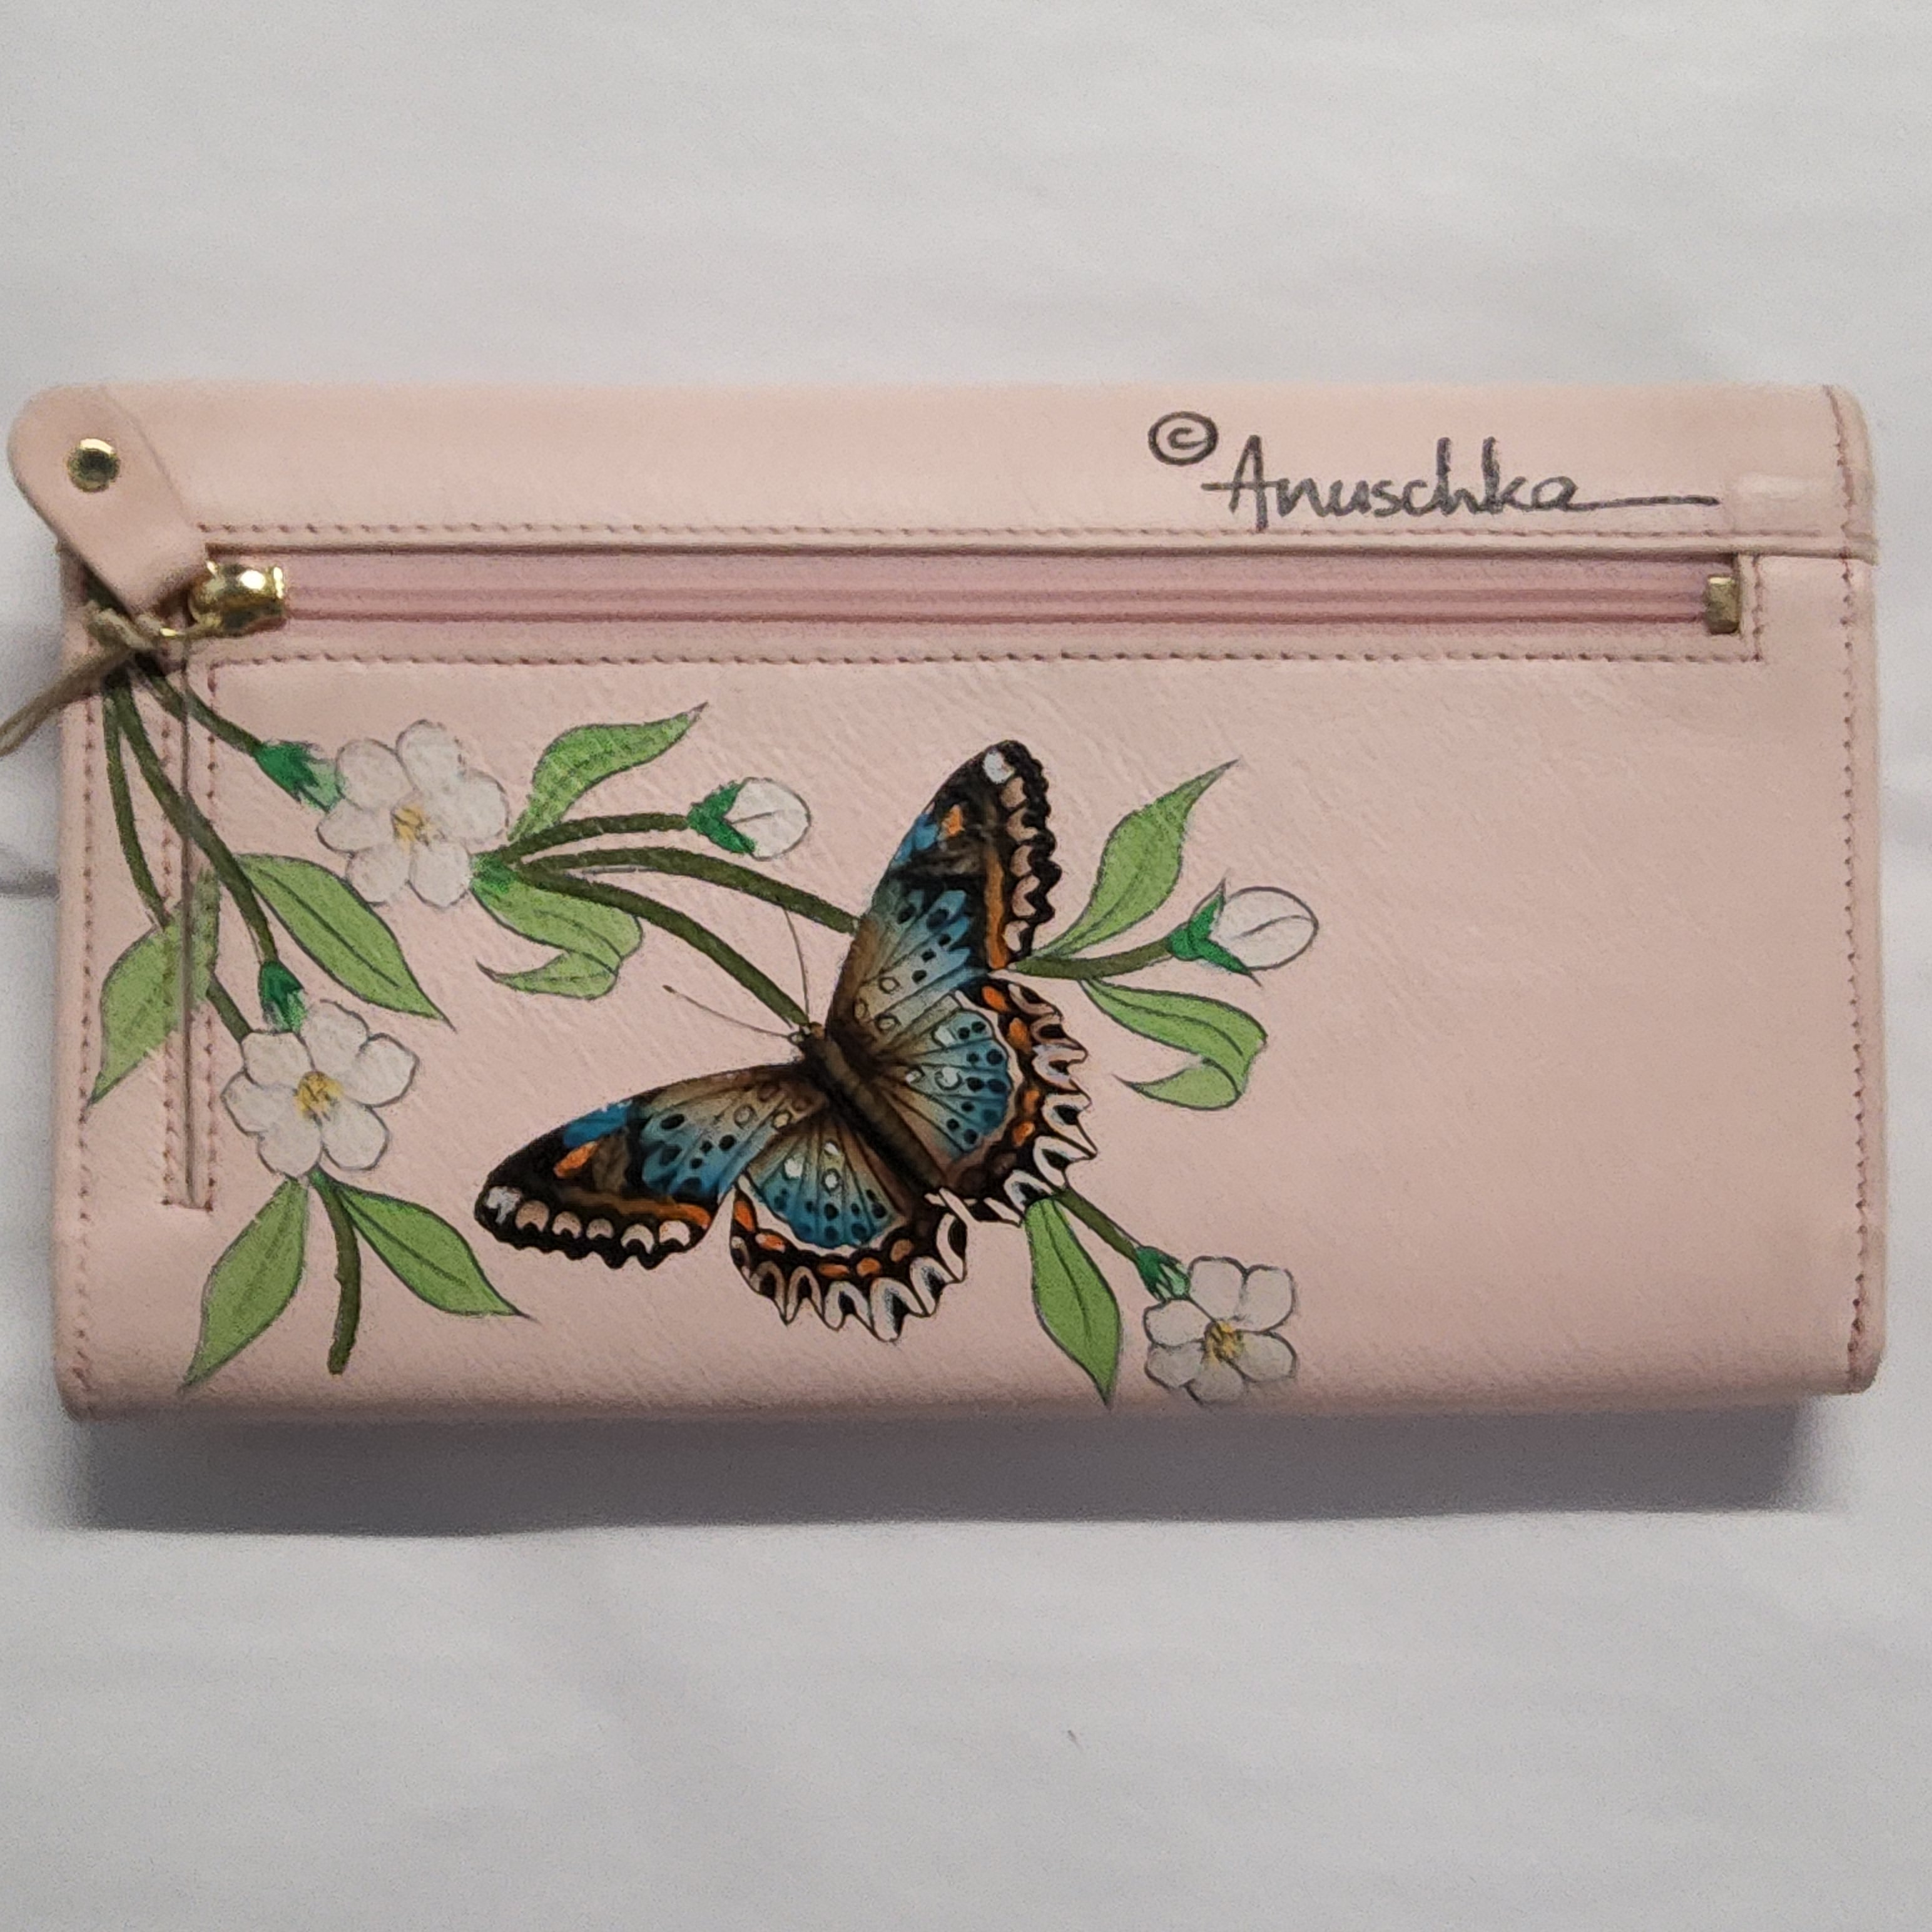 Anuschka Hand-Painted Leather Tri-Fold Wallet Flowers and Butterflies